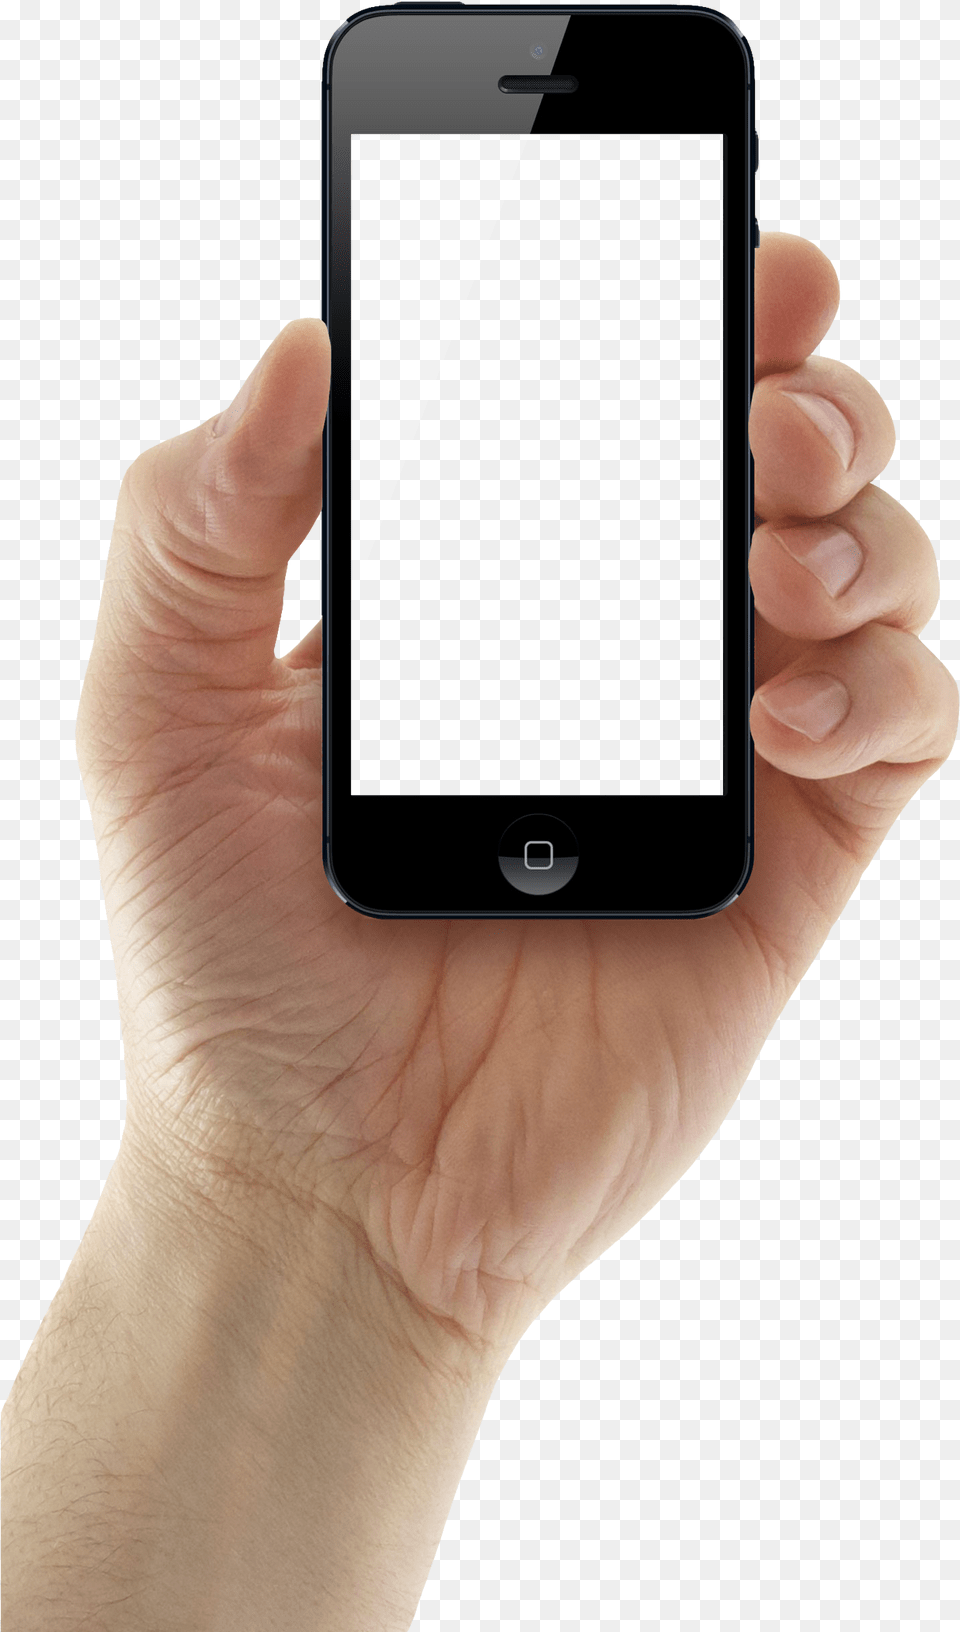 Phone In Hand Hand Holding Cellphone, Electronics, Mobile Phone, Iphone Png Image